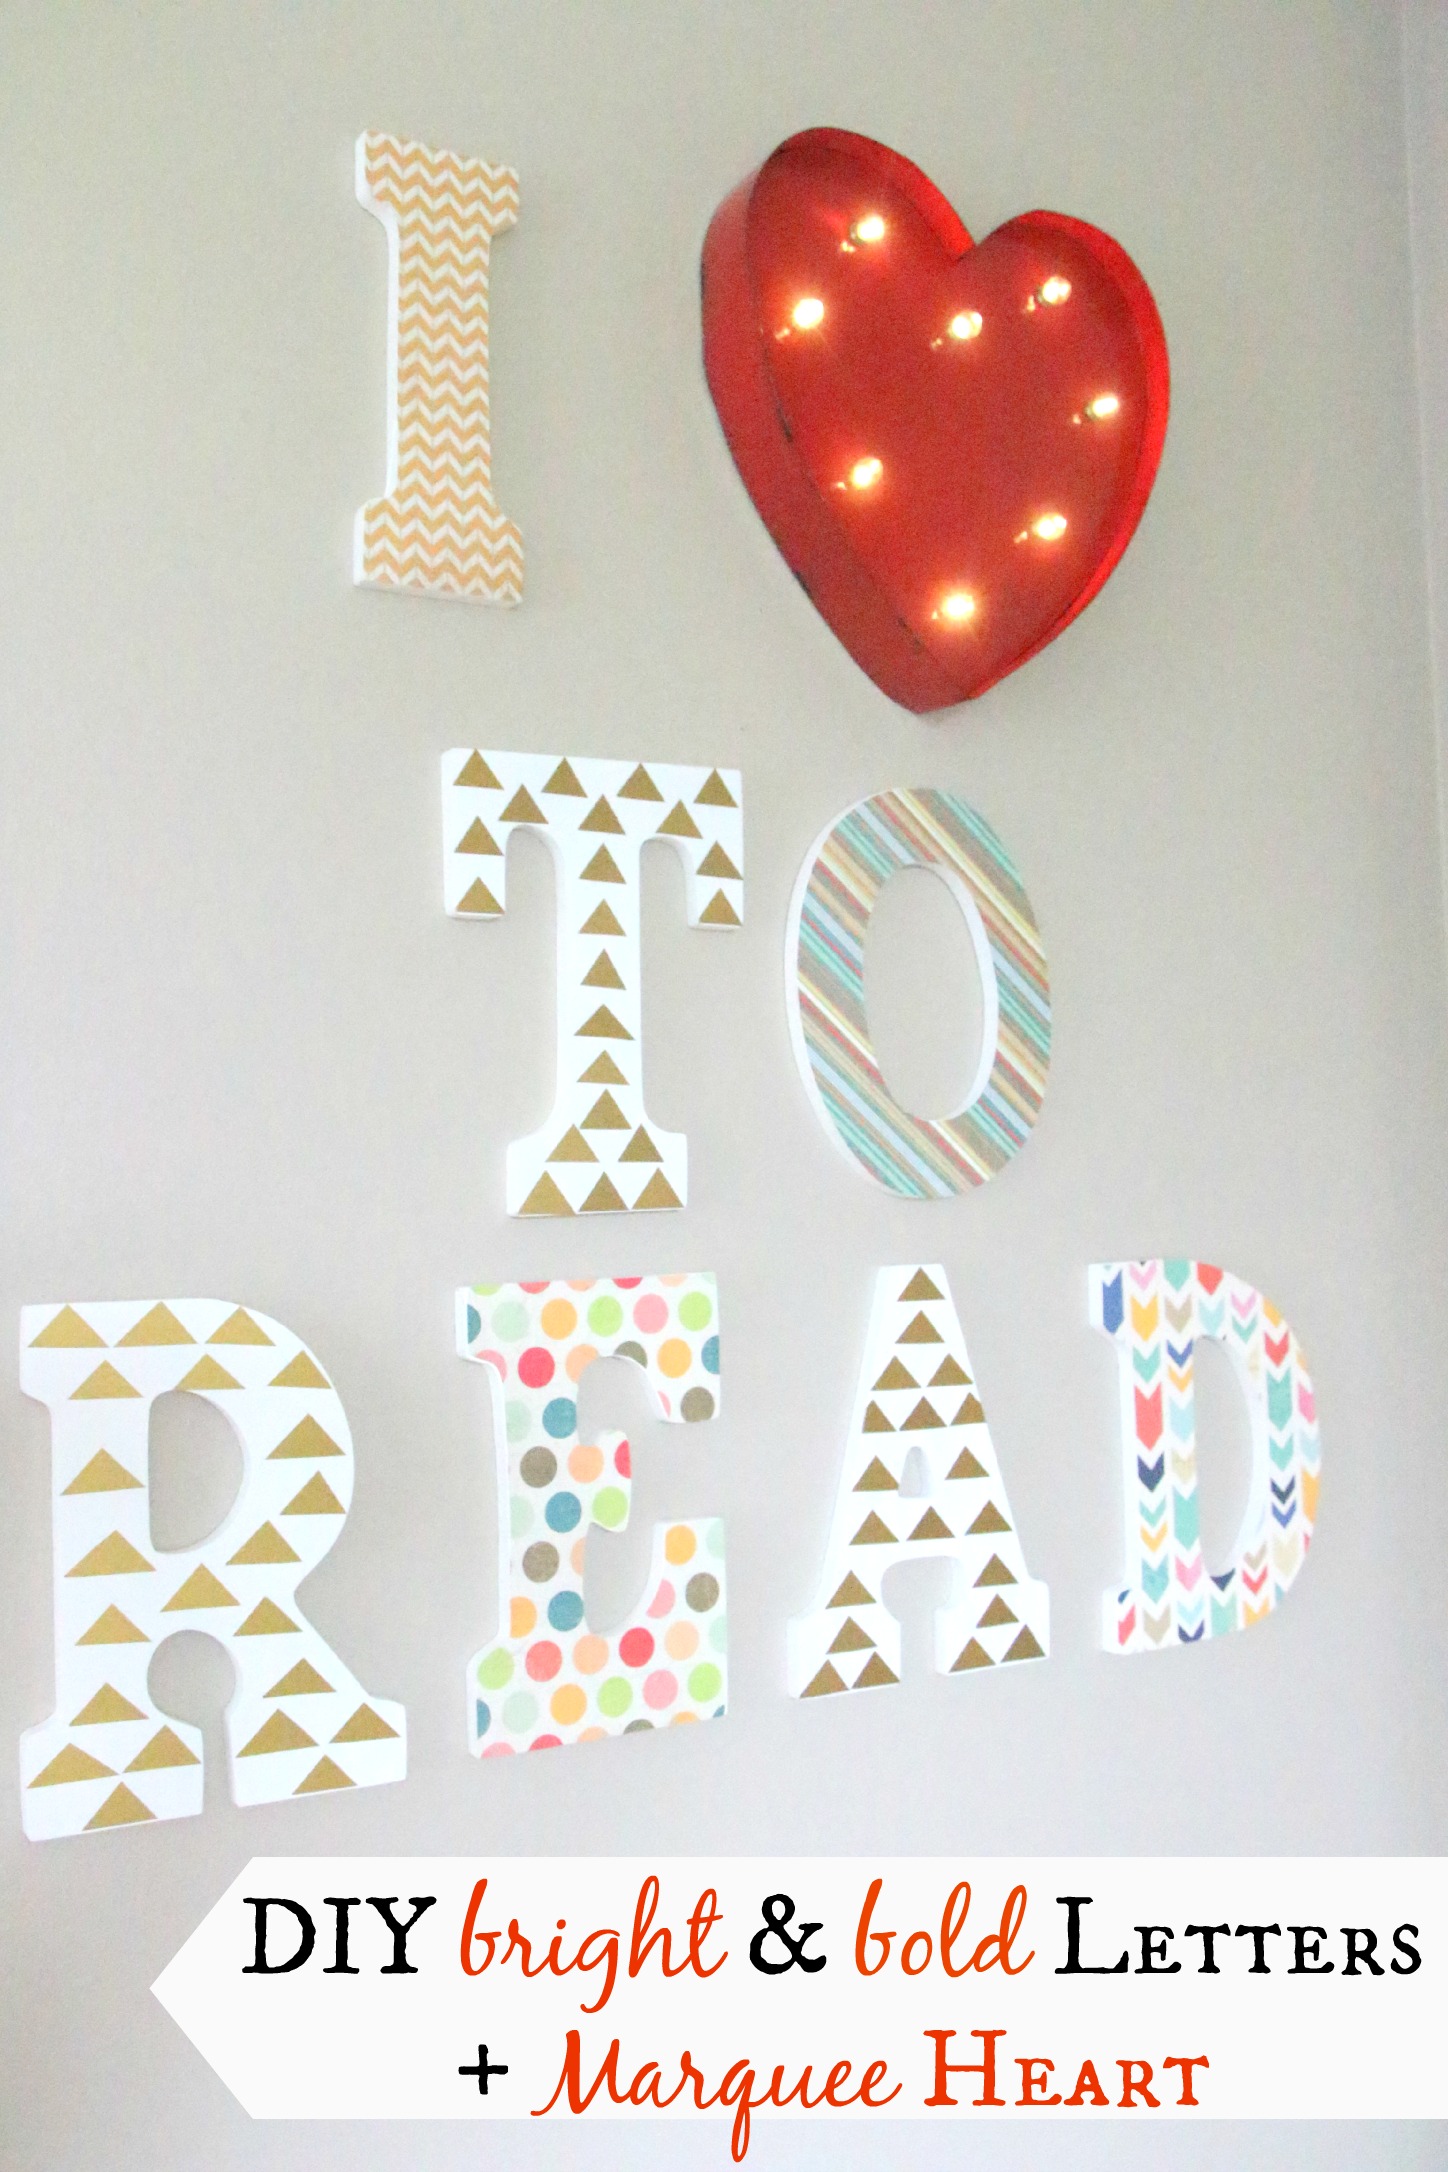 DIY bright & bold letters + Marquee Heart